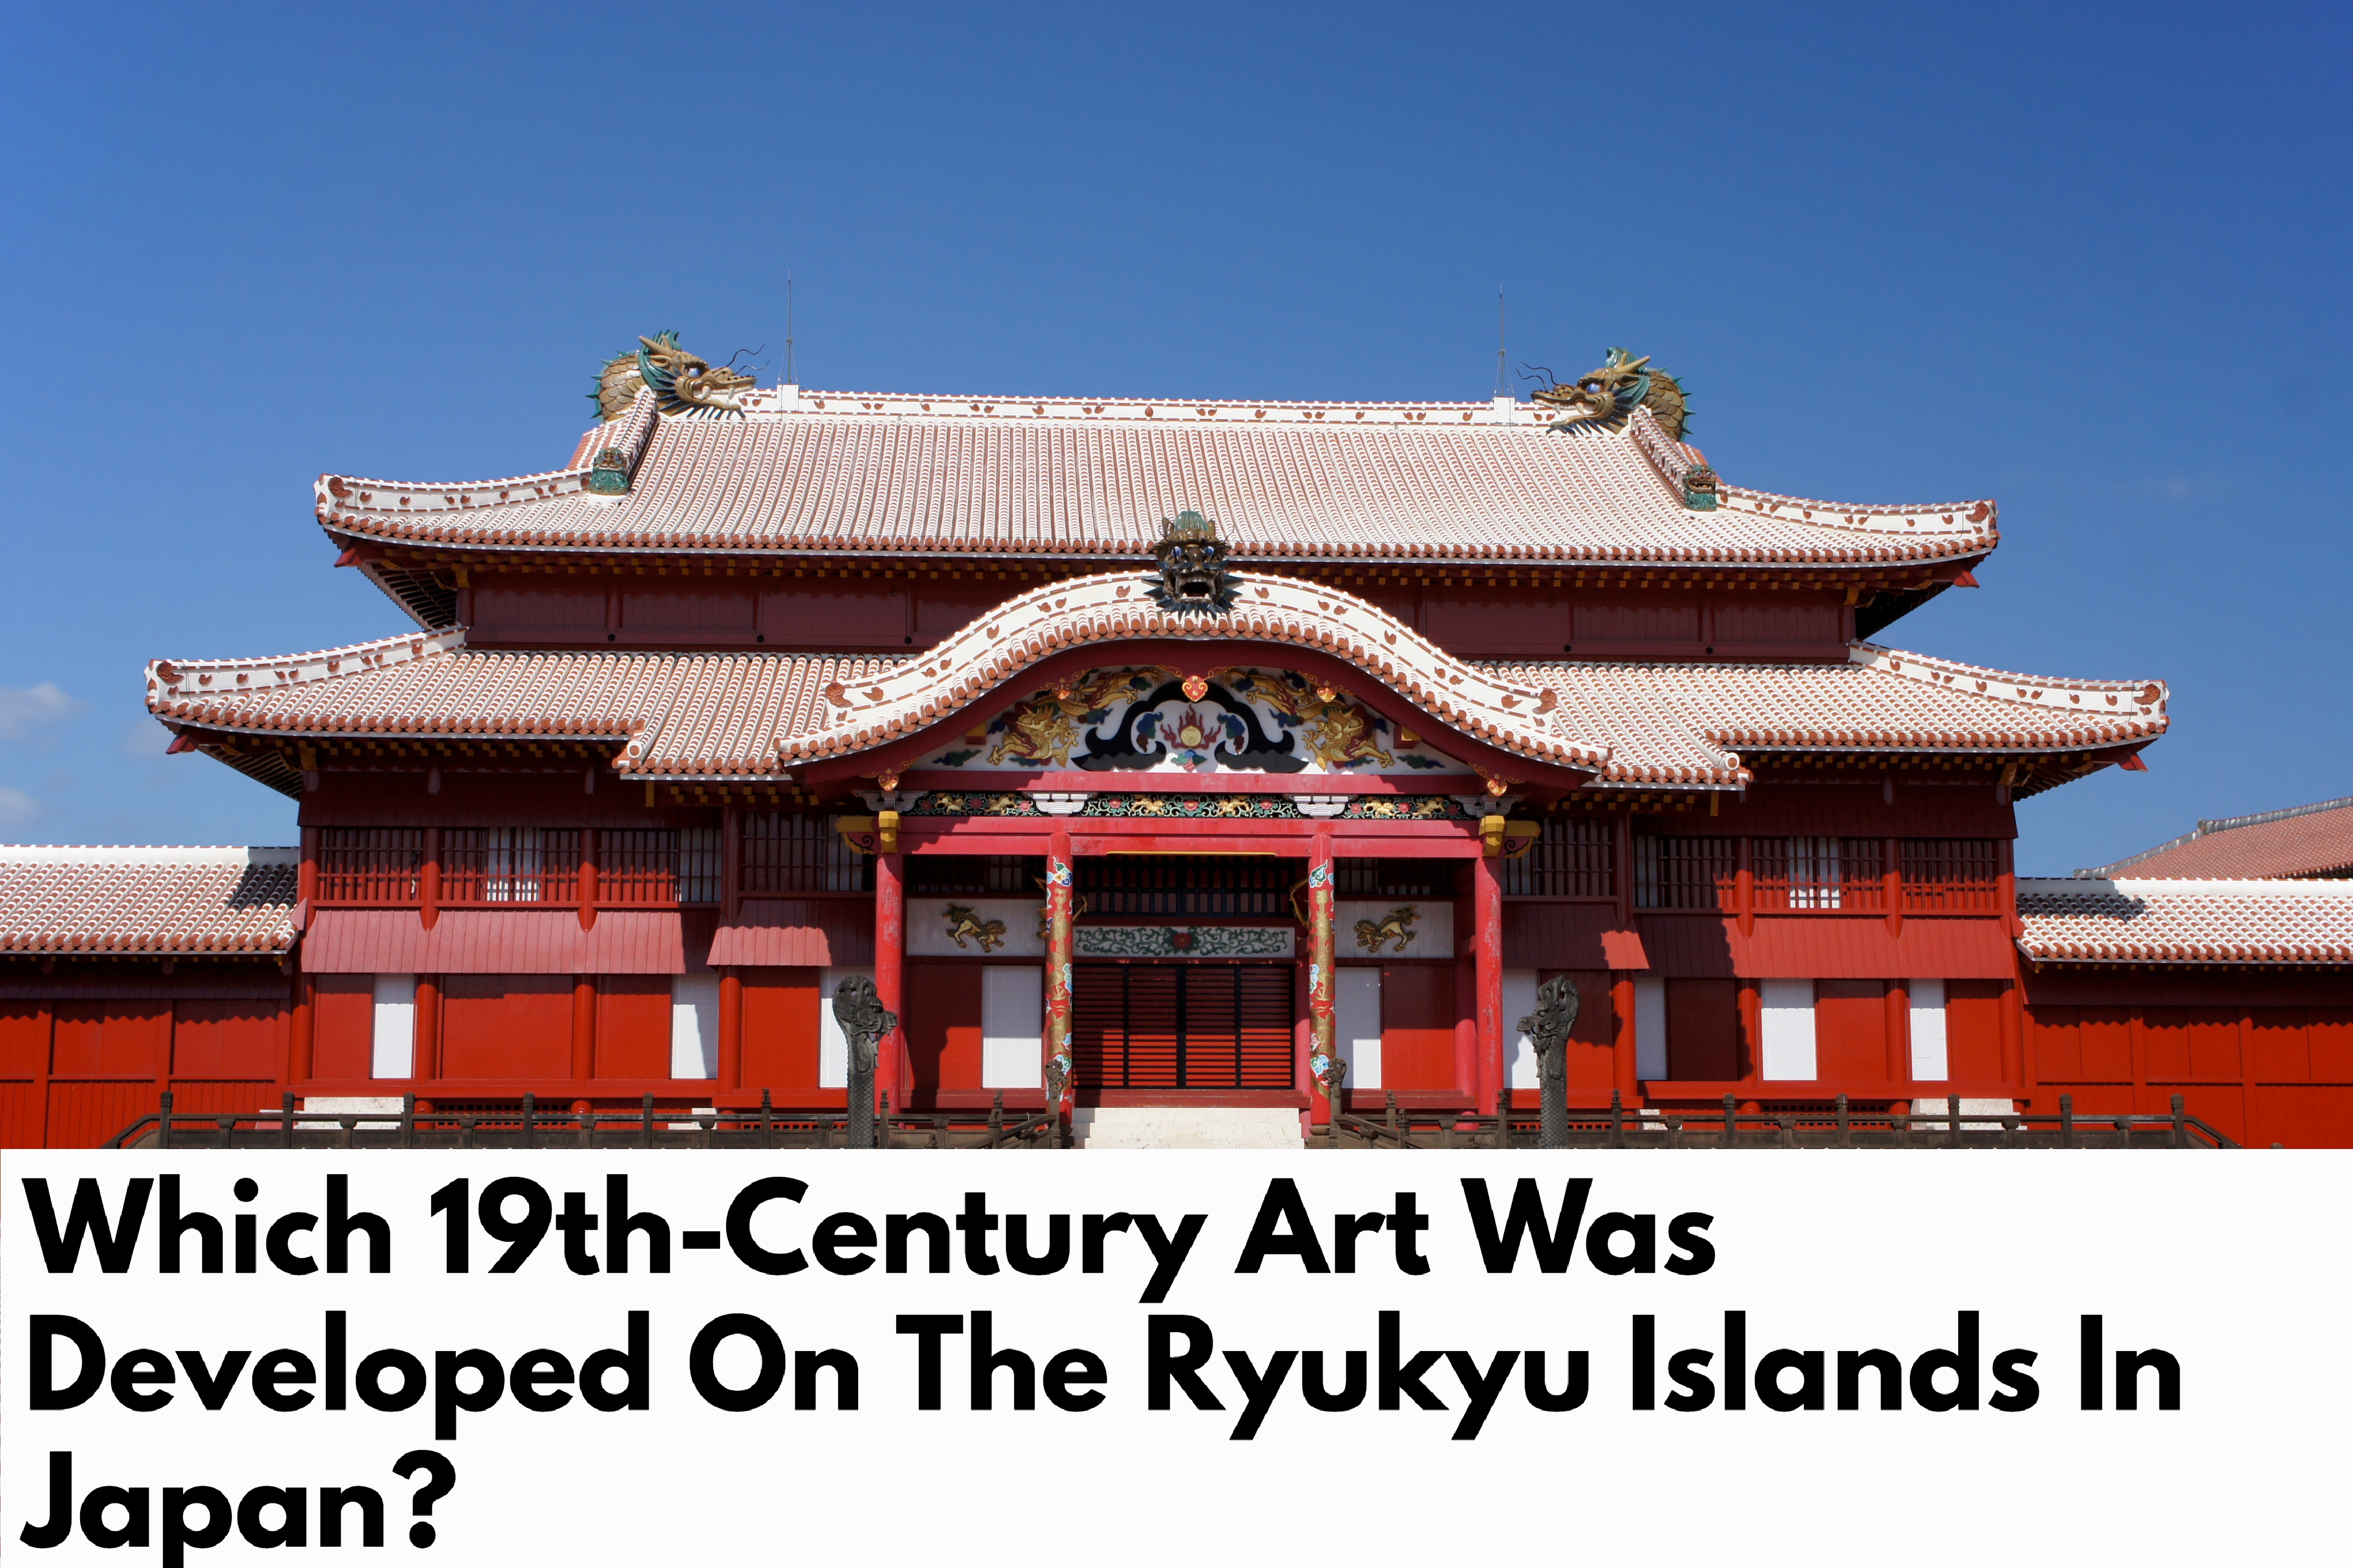 Which 19th-Century Art Was Developed On The Ryukyu Islands In Japan?